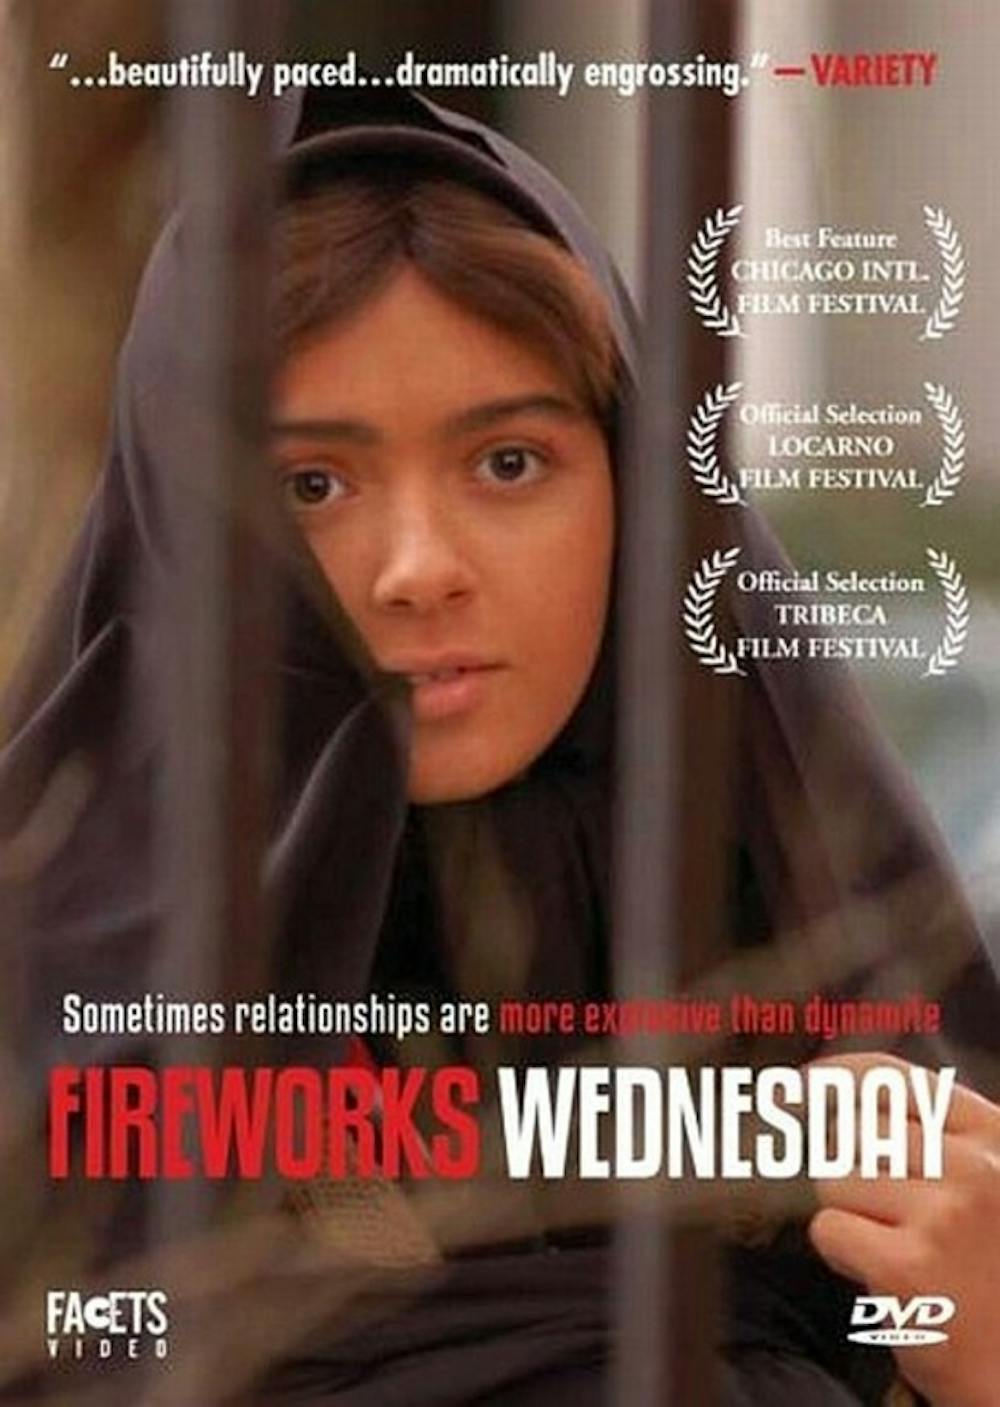 The Douglass Theatre has become well-known for its film screenings, including an upcoming screening of the captivating Iranian film “Fireworks Wednesday.”